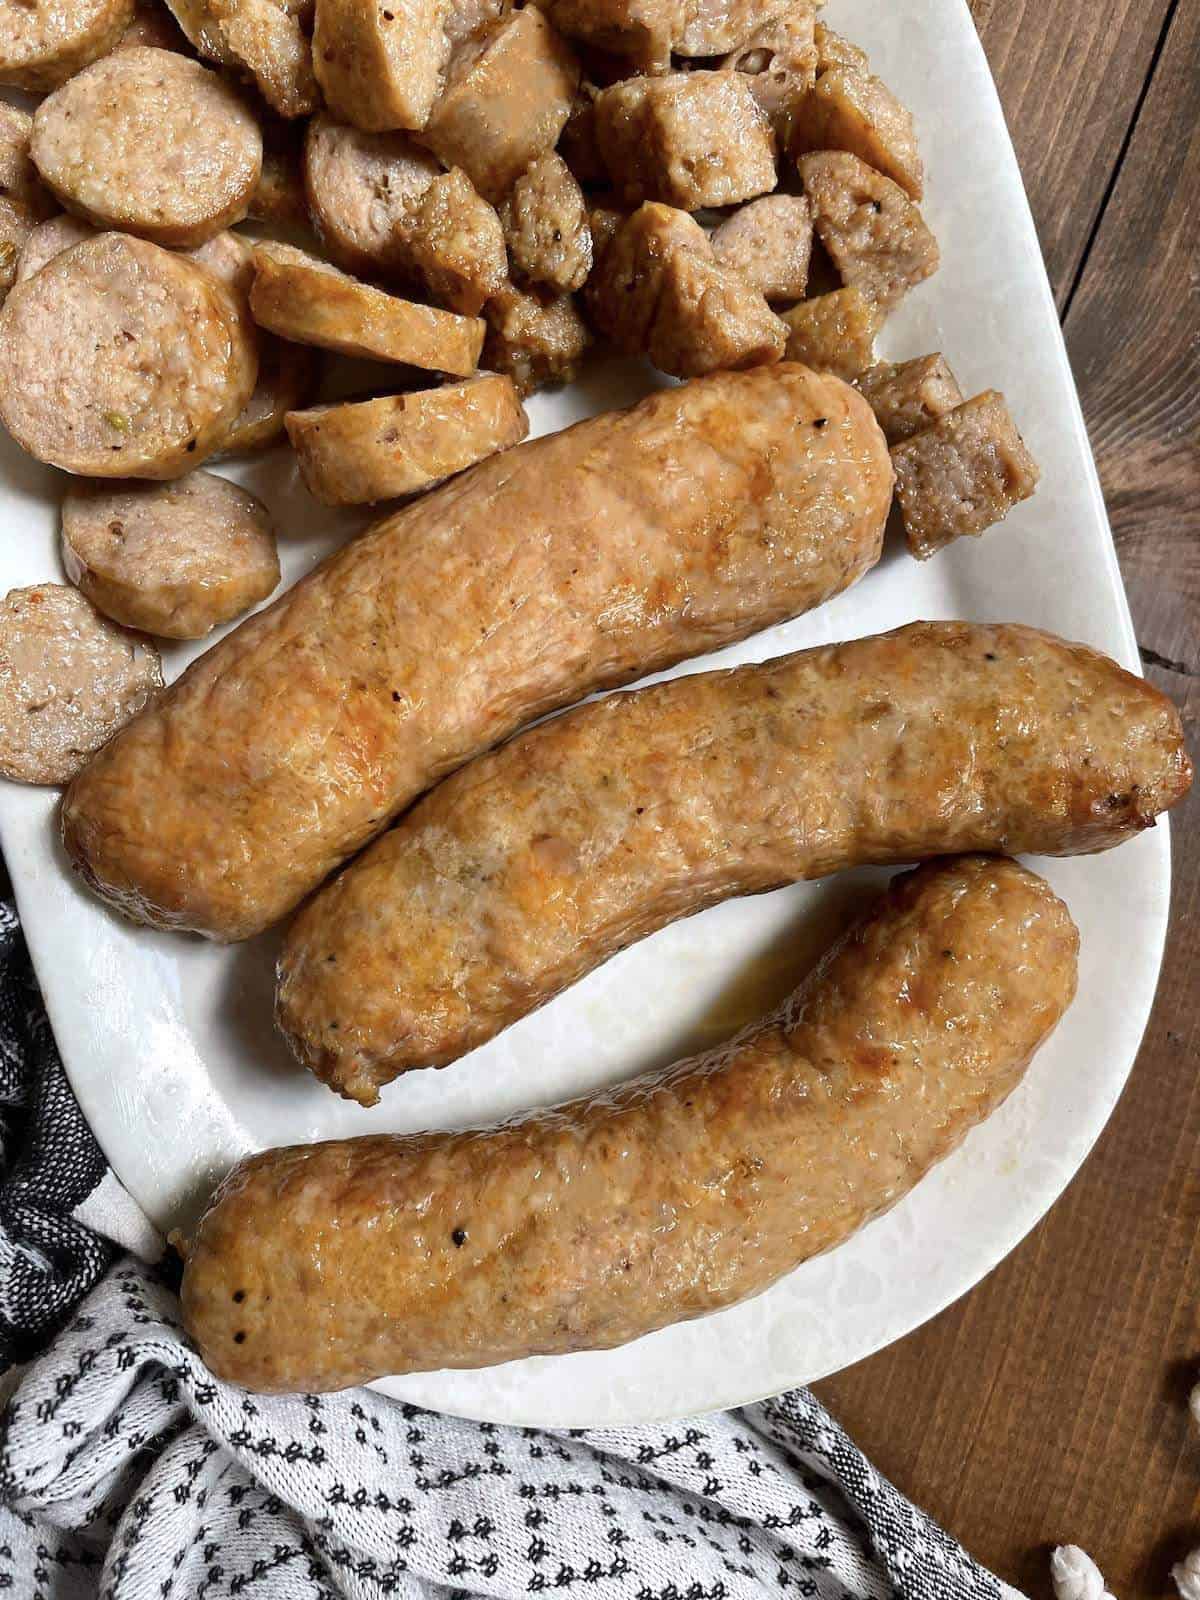 Air fried Italian sausages cut in different ways on a white plate.